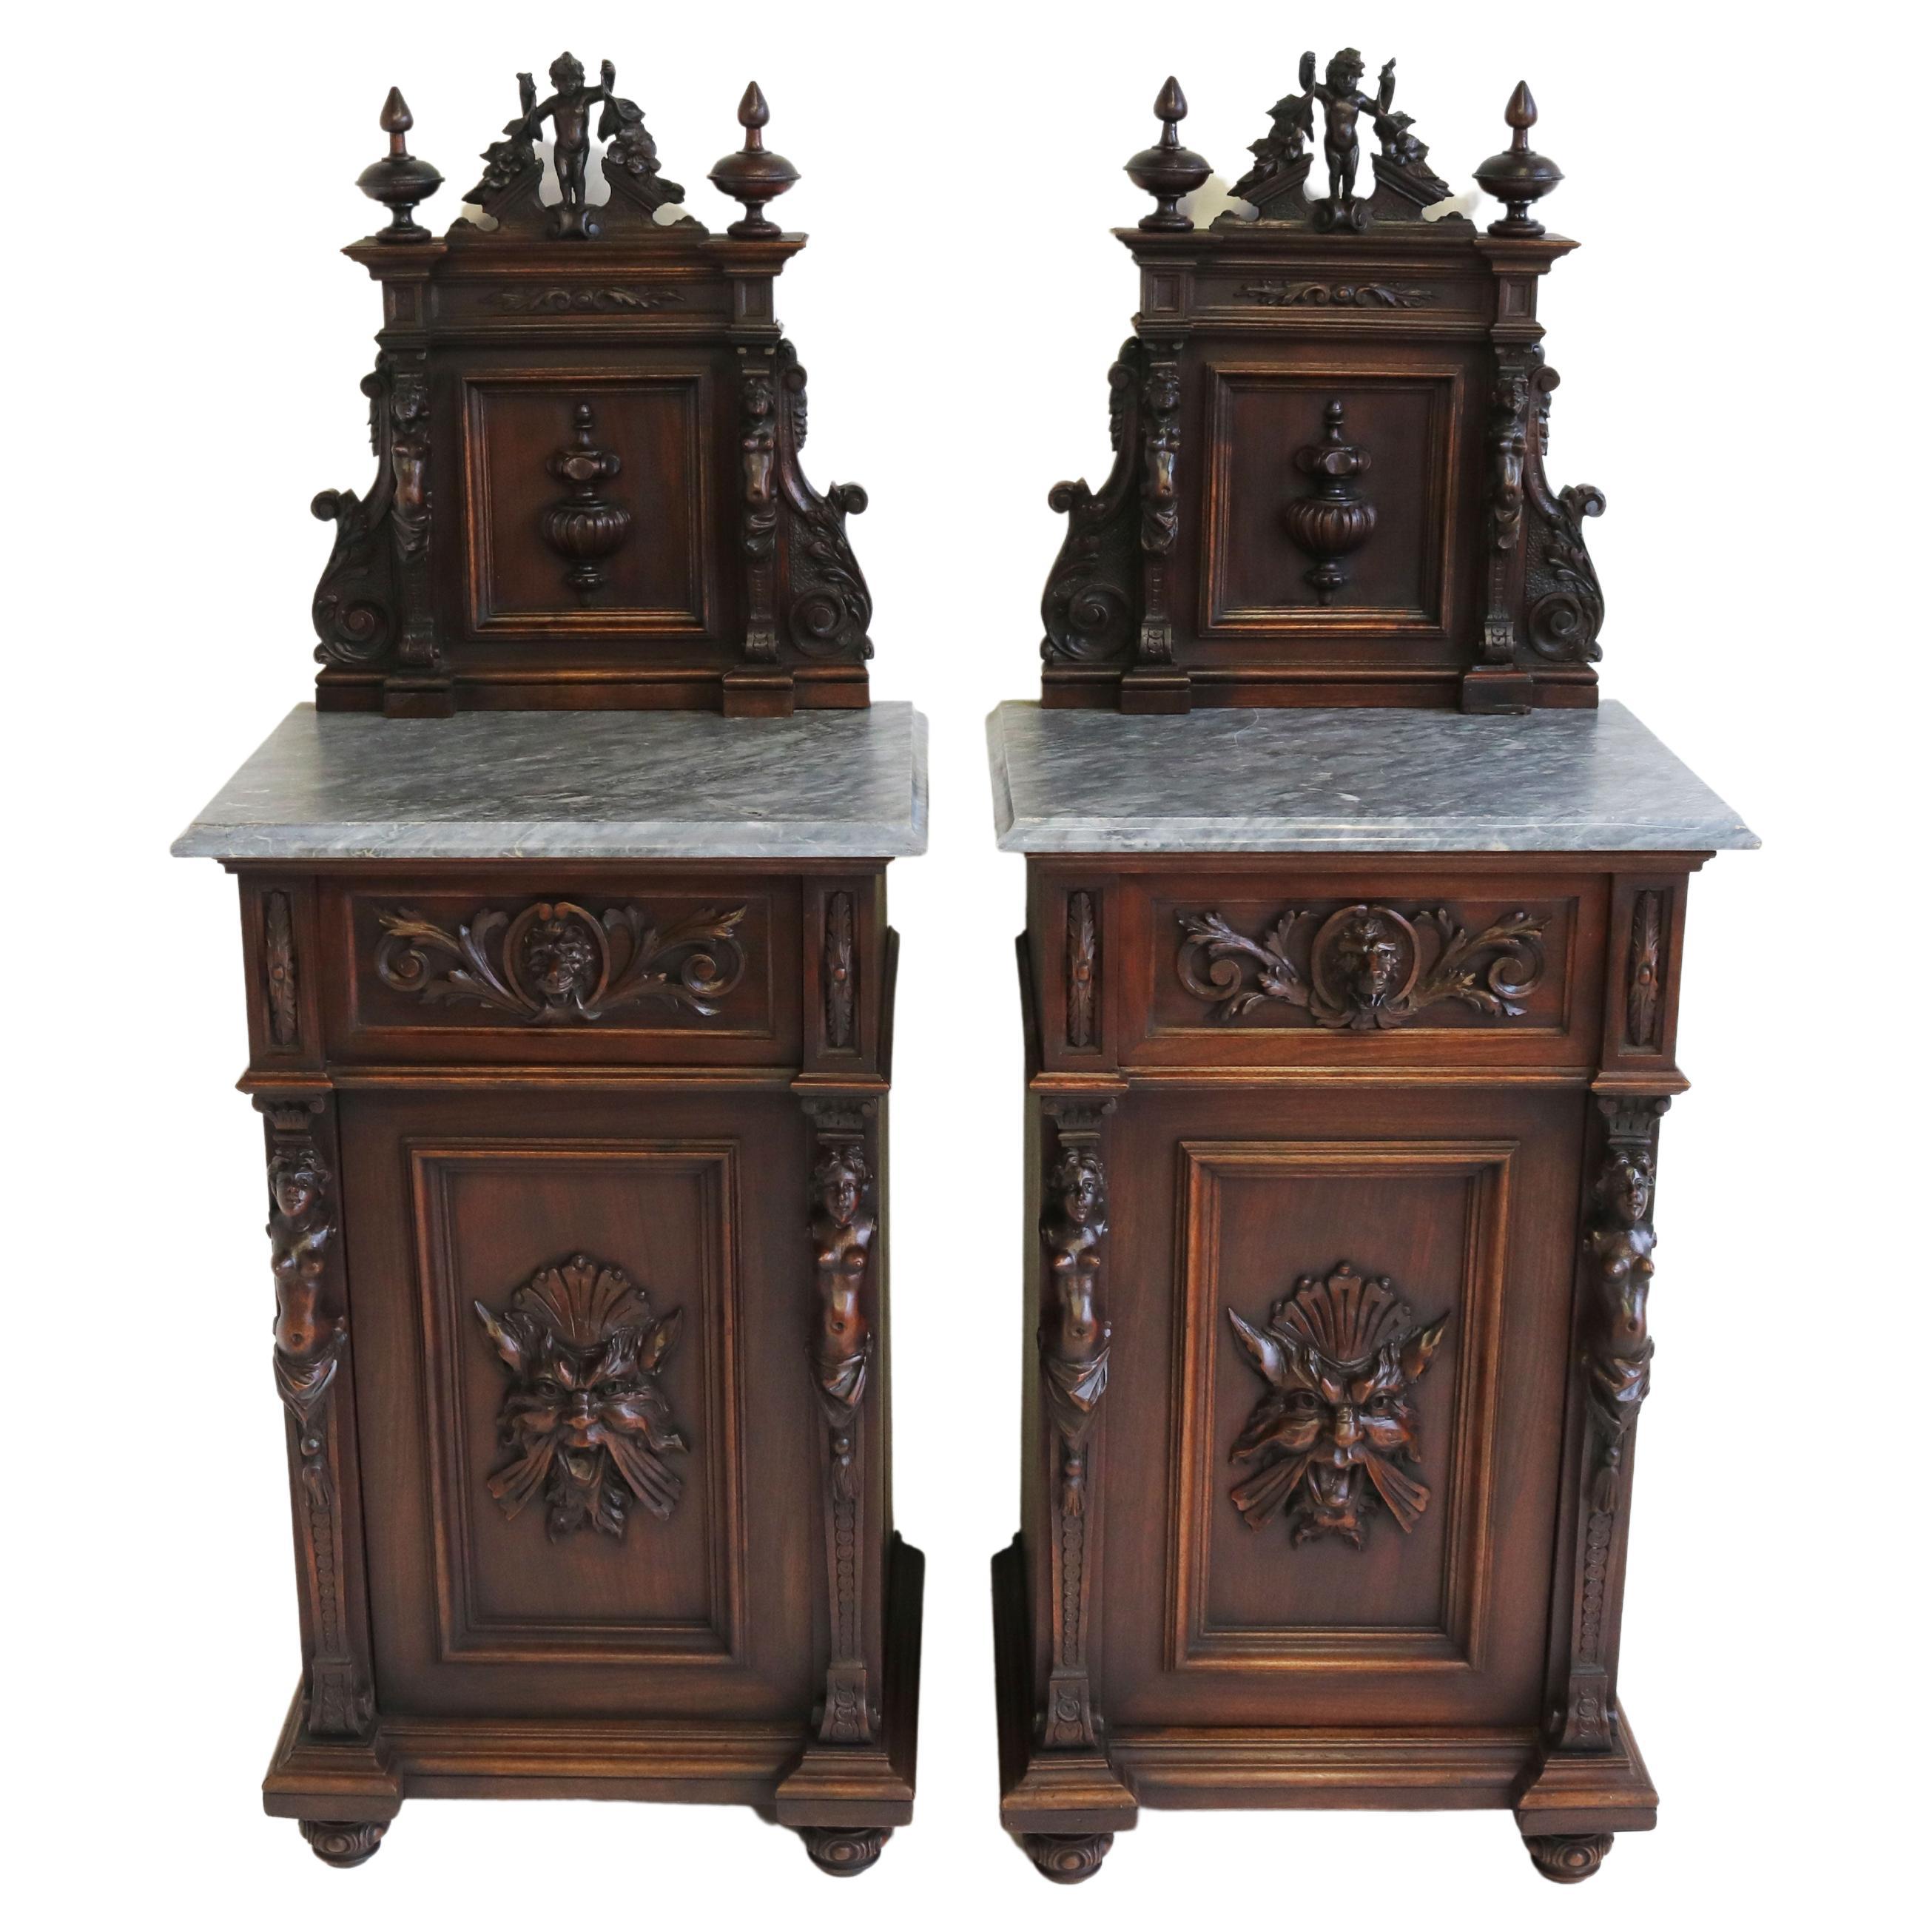 Antique 19th Century Italian Renaissance Revival Bedside Tables / Nightstands For Sale